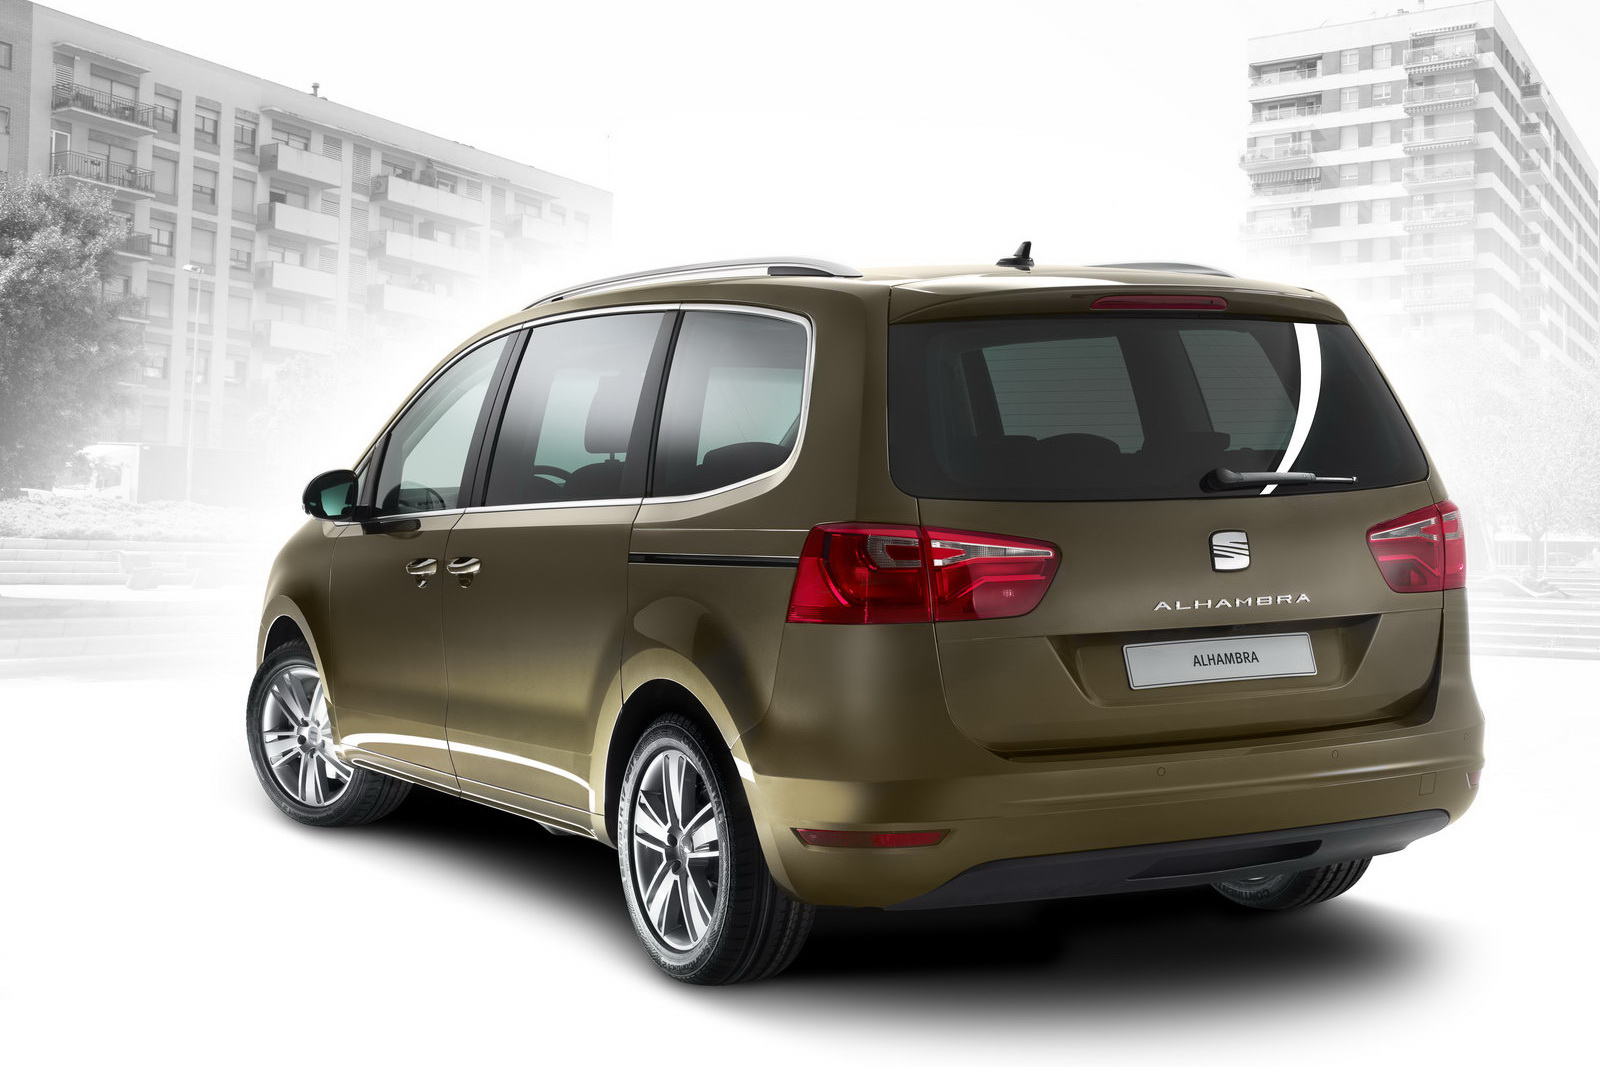 seat alhambra mpv pictures seat alhambra mpv wallpaper the all new ...